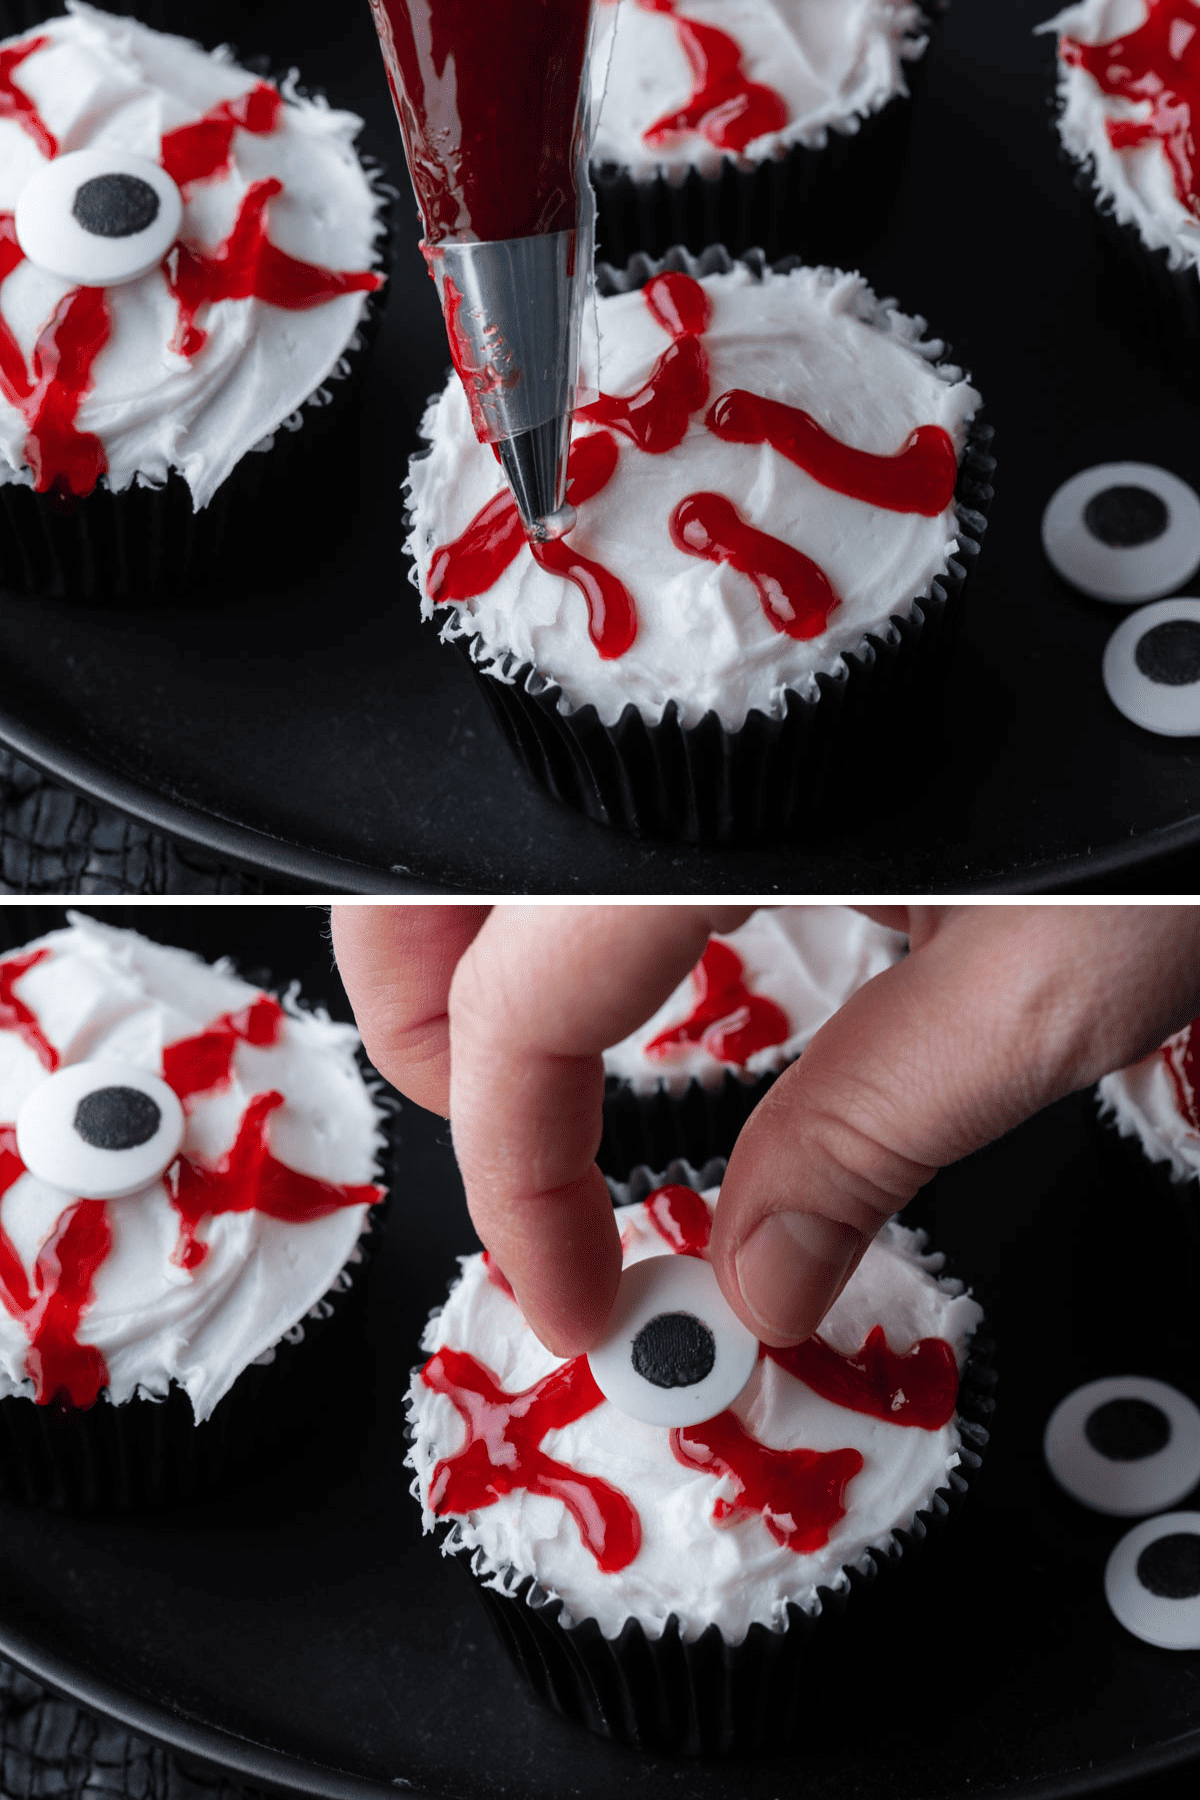 a collage of two photos making eyeball cupcakes, one piping bloody jam on to make the bloodshot eyes look and the other placing a candy eyeball in the middle